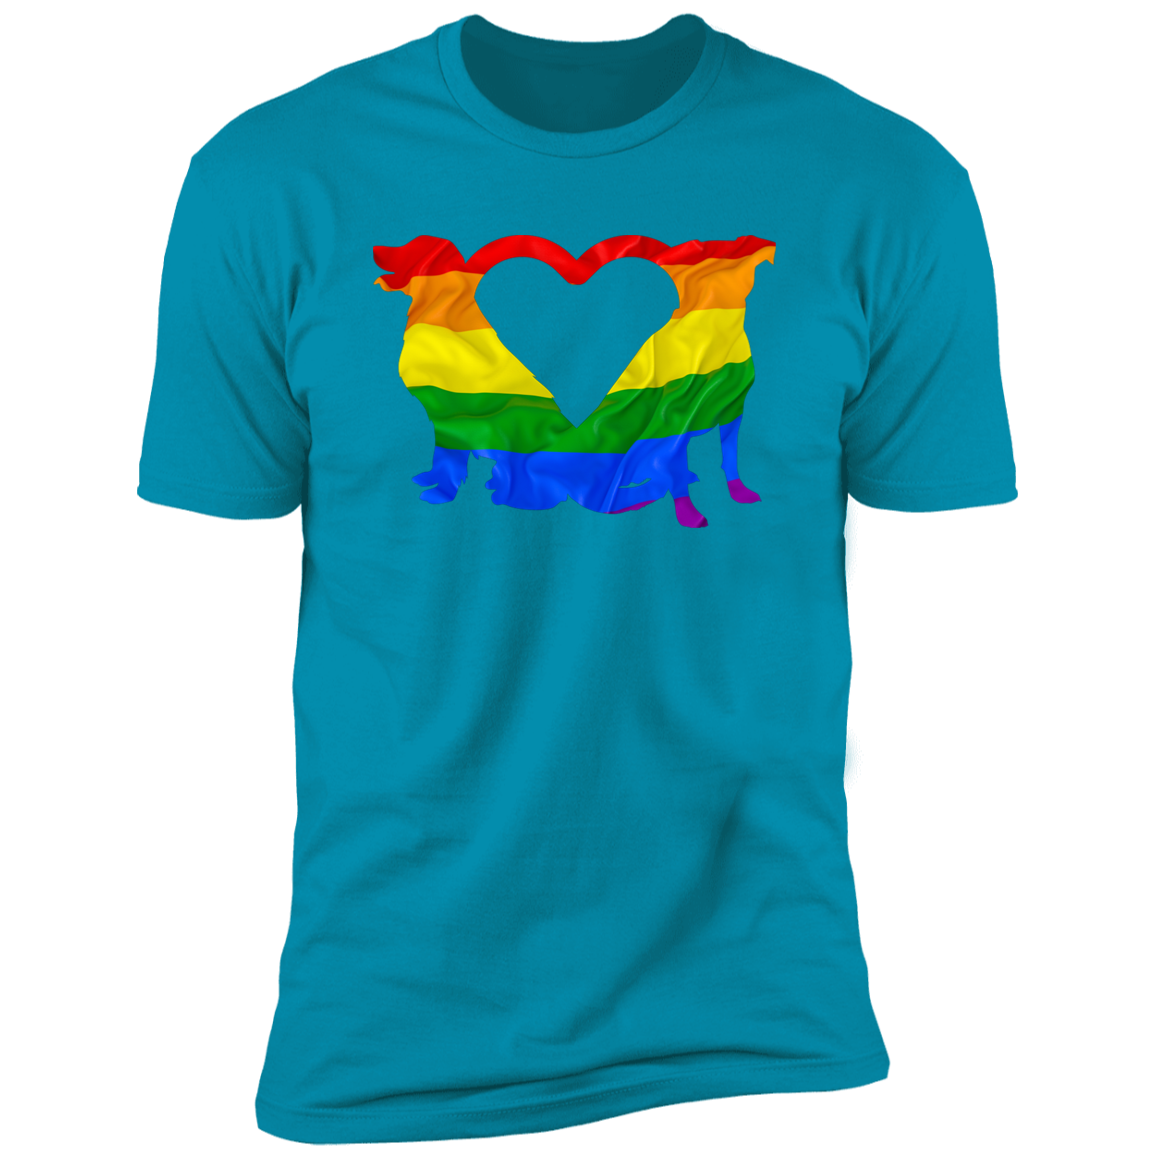 Dog Pride, Dog Pride shirt for humas, in turquoise 